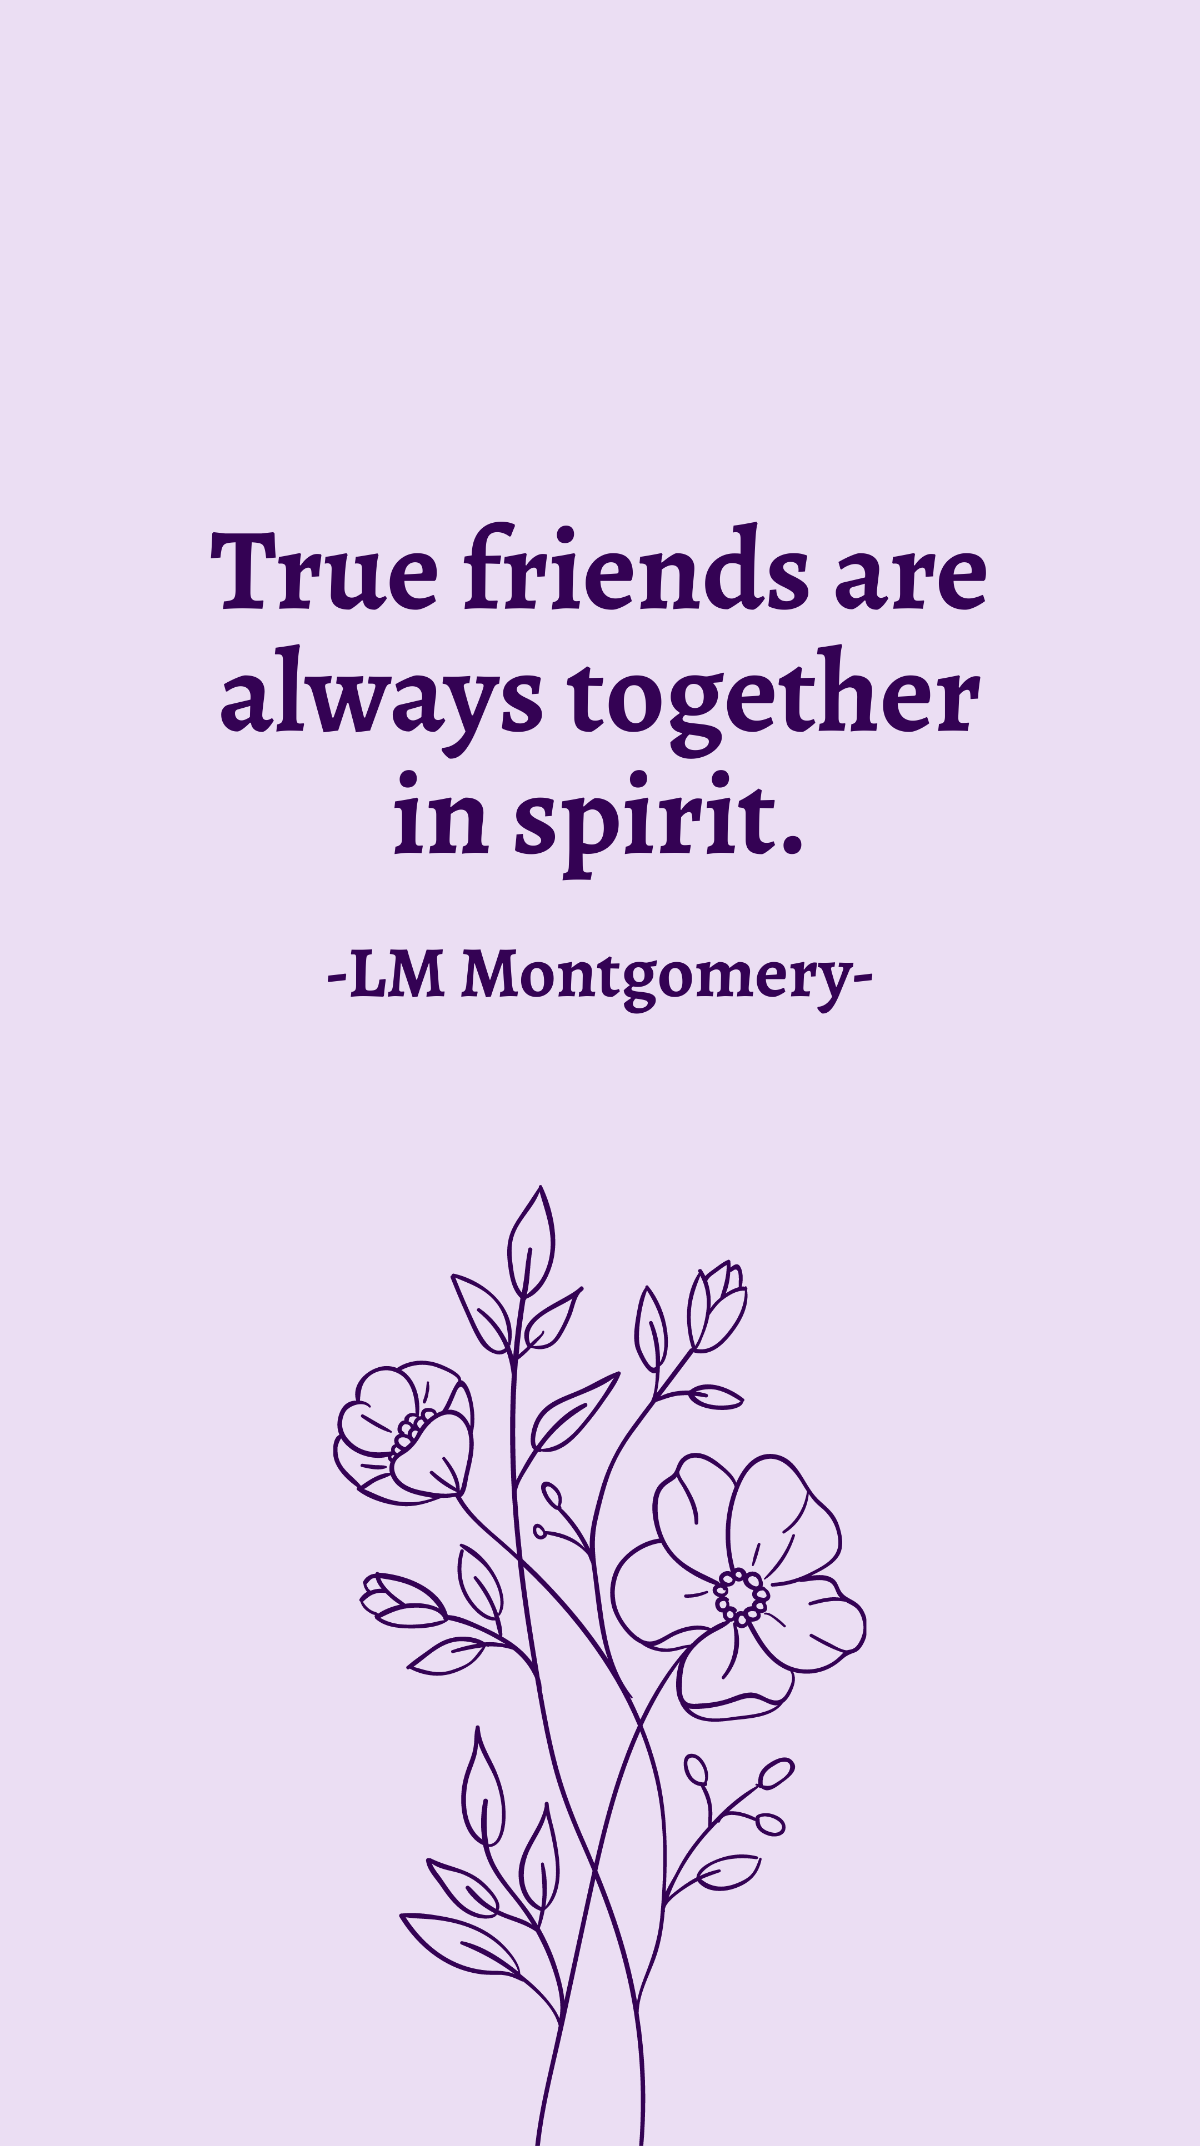 LM Montgomery - True friends are always together in spirit. Template